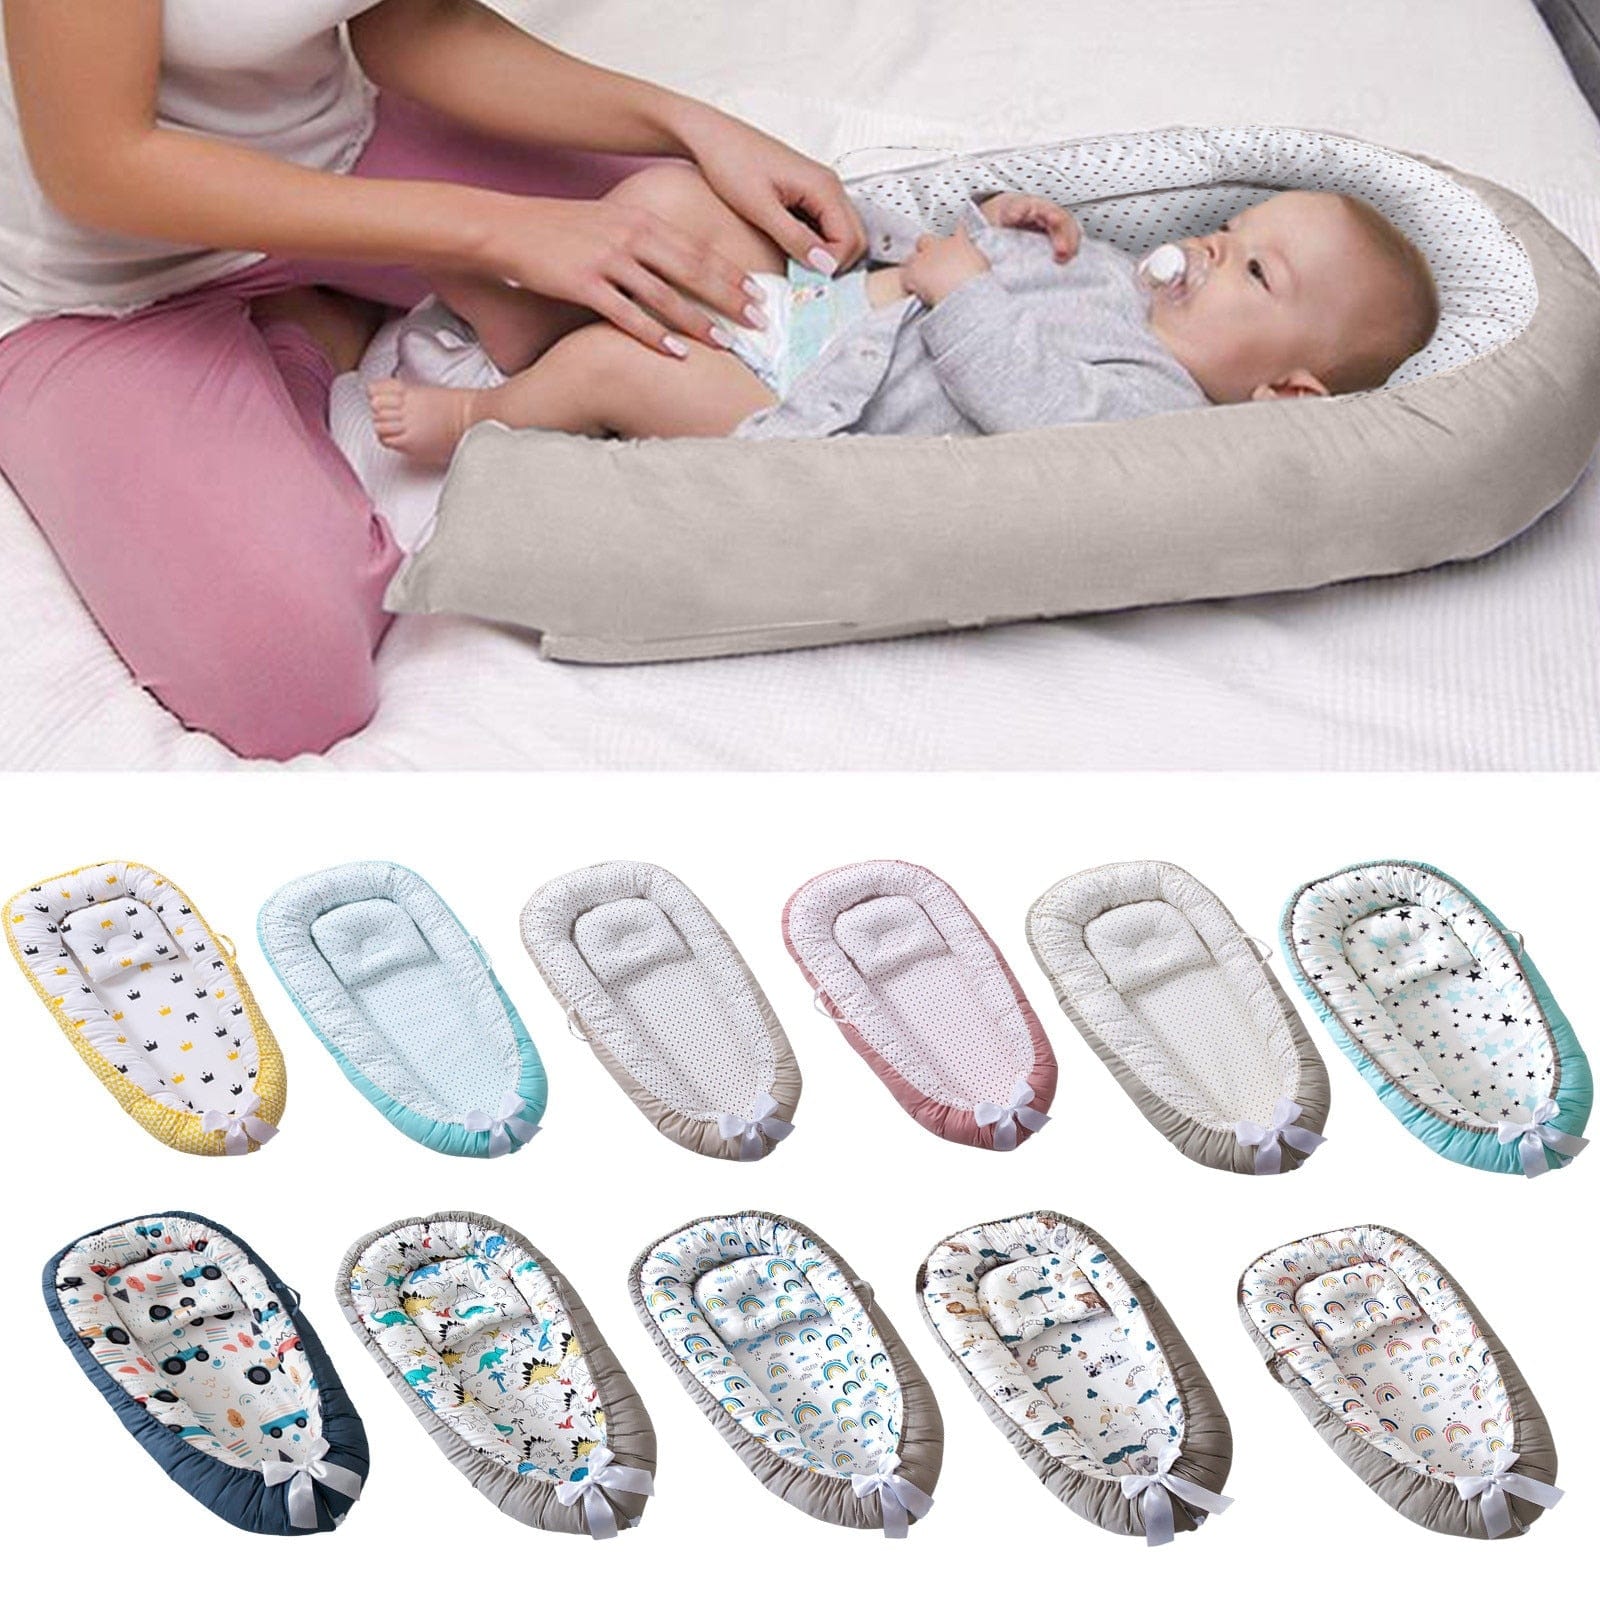 Motherhood Baby Nest Bed with 3 pc Baby Pillow Luxury Baby